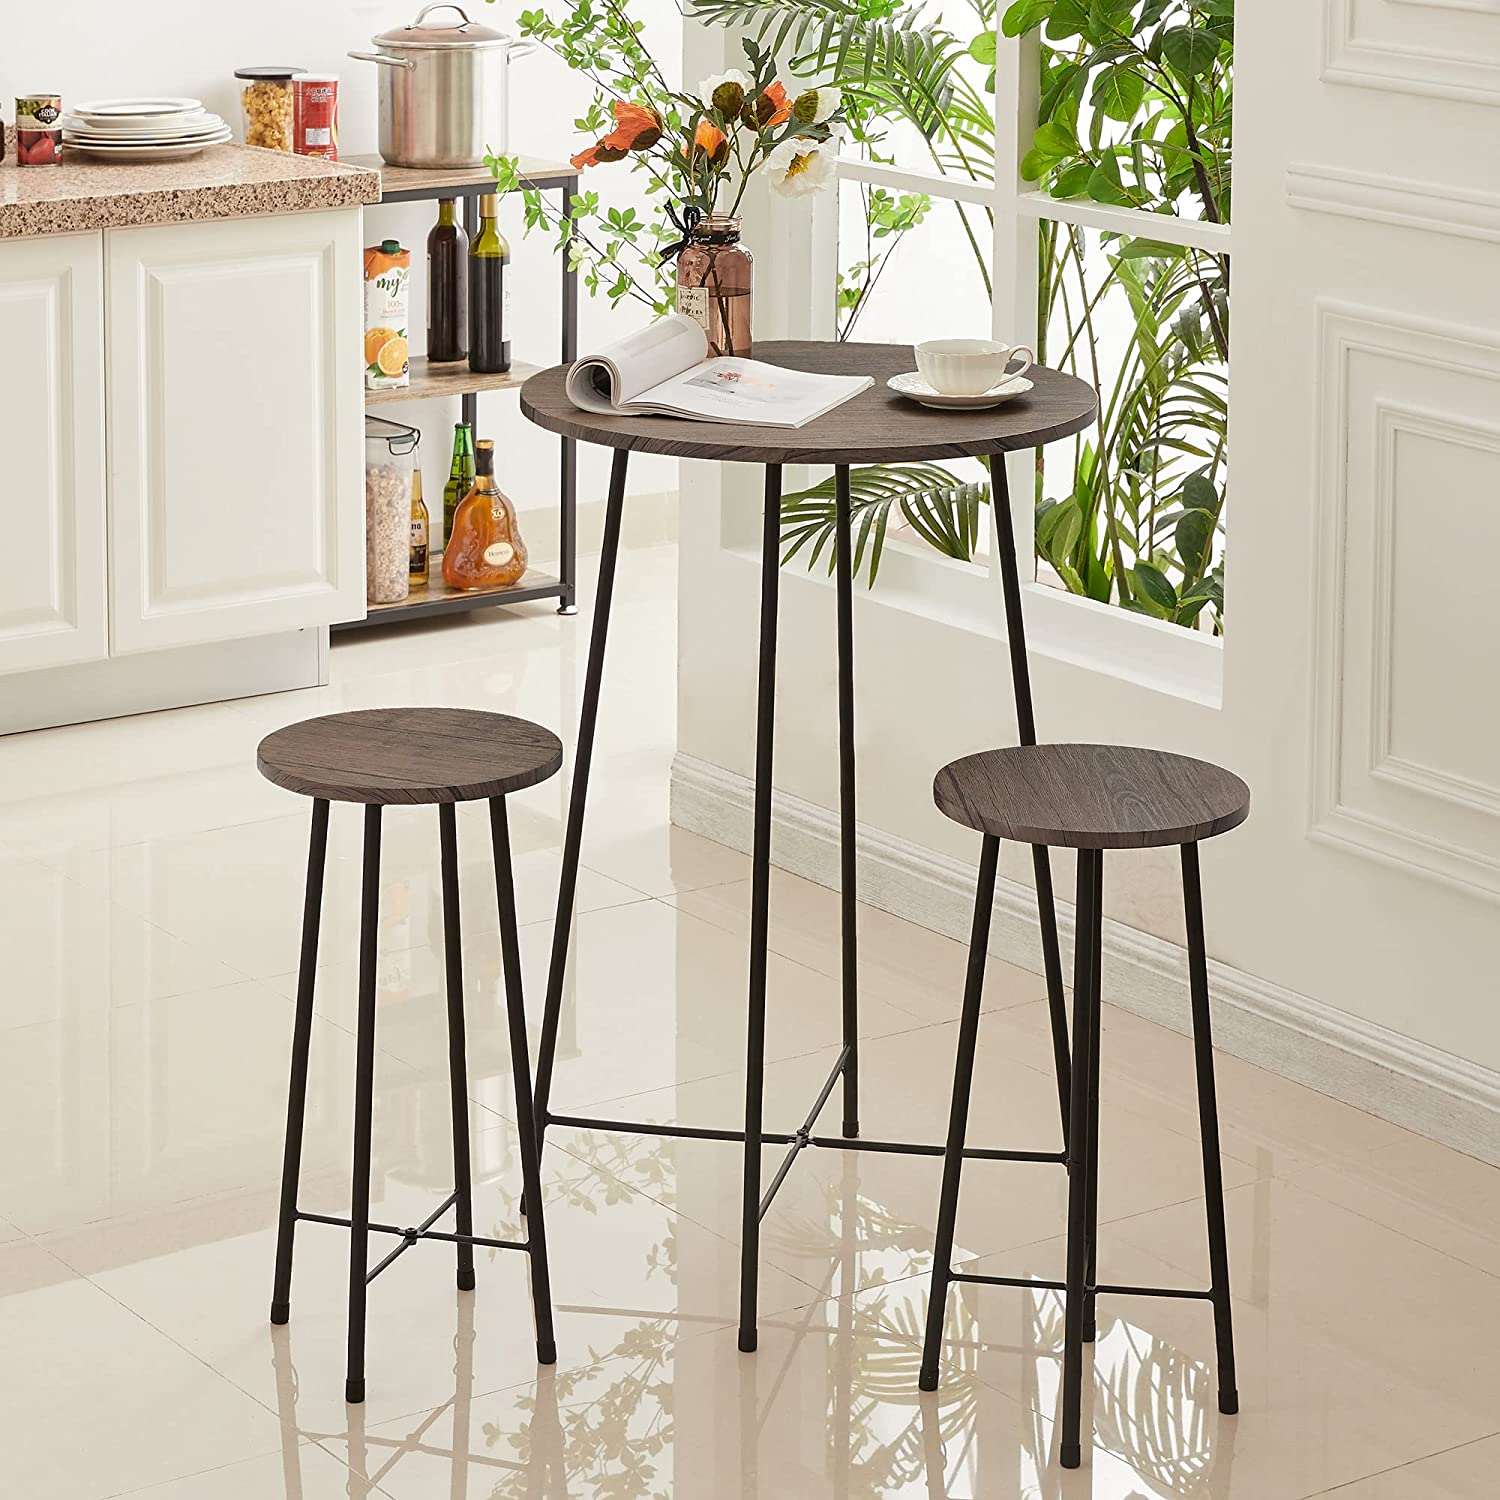 VECELO 3-Piece Round Bistro Table and Chairs Set with Counter Height & Wood top for Dining Room